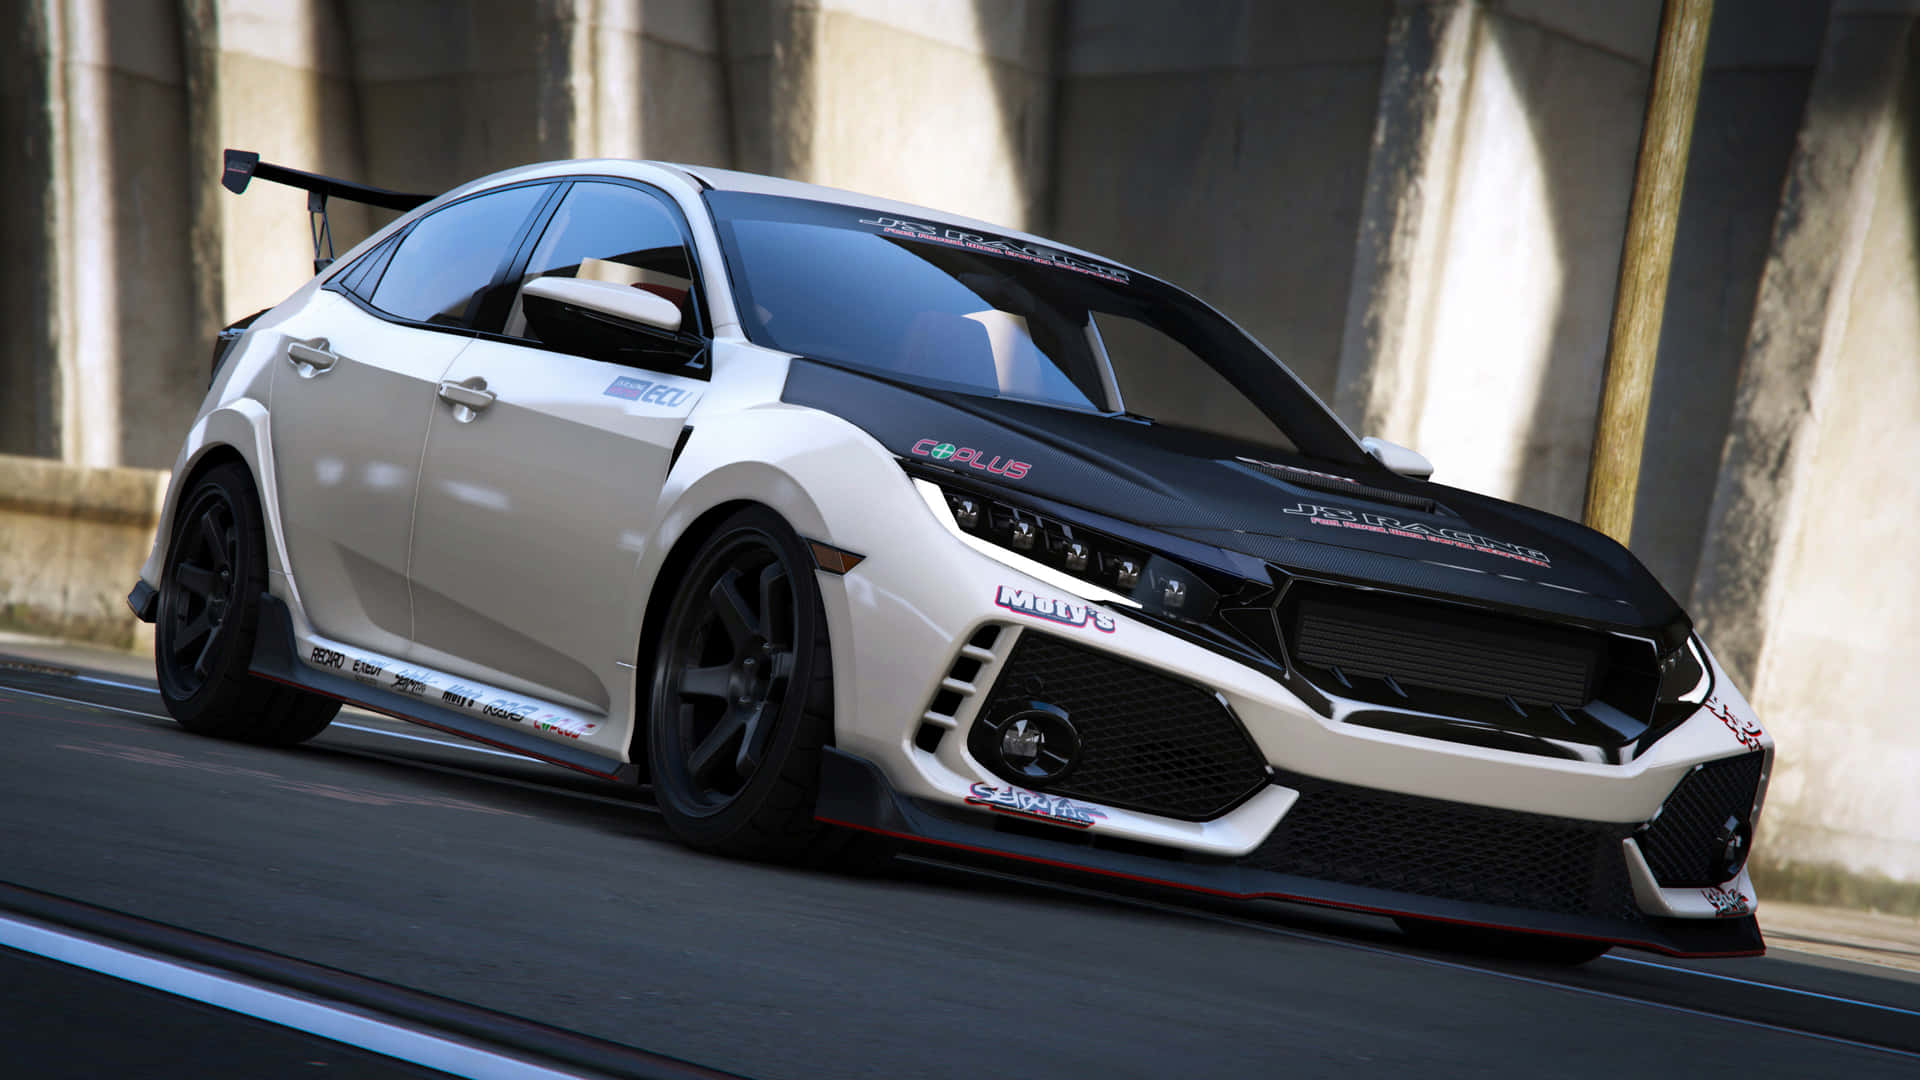 "A Sports Car to Conquer the Streets - The Honda Civic Type R" Wallpaper